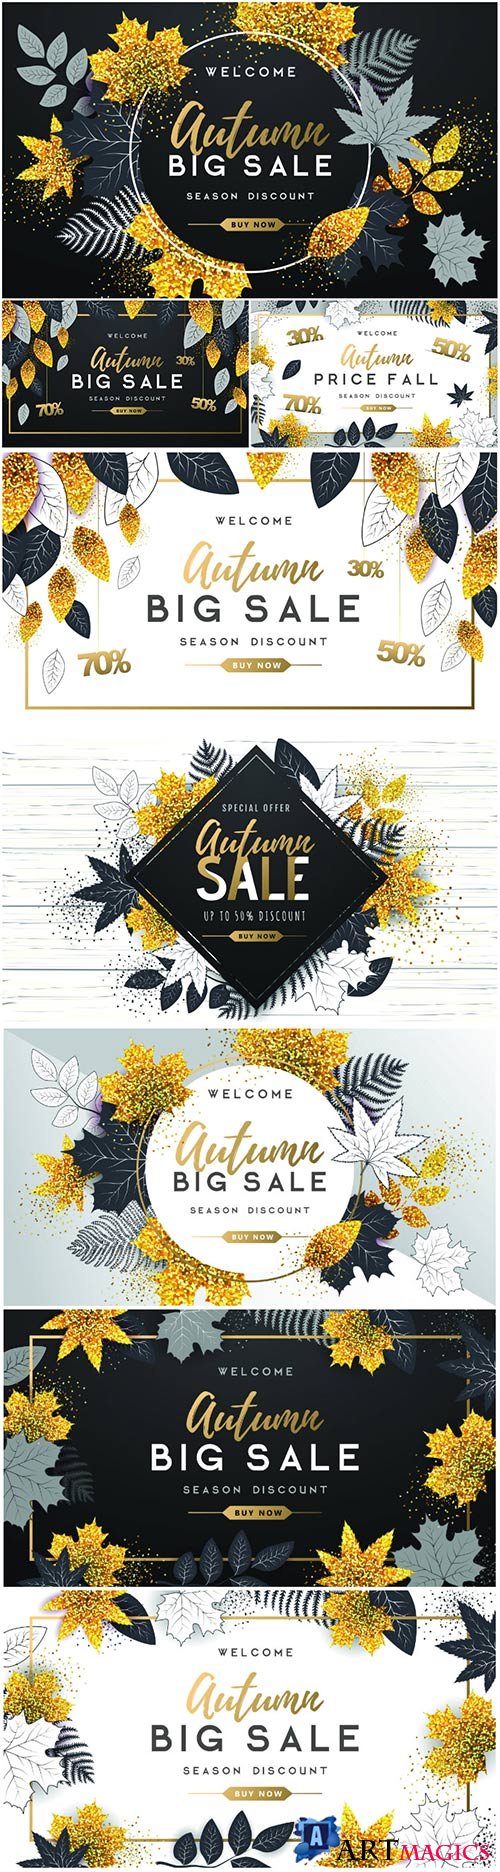 Autumn big sale poster with golden and black autumn leaves